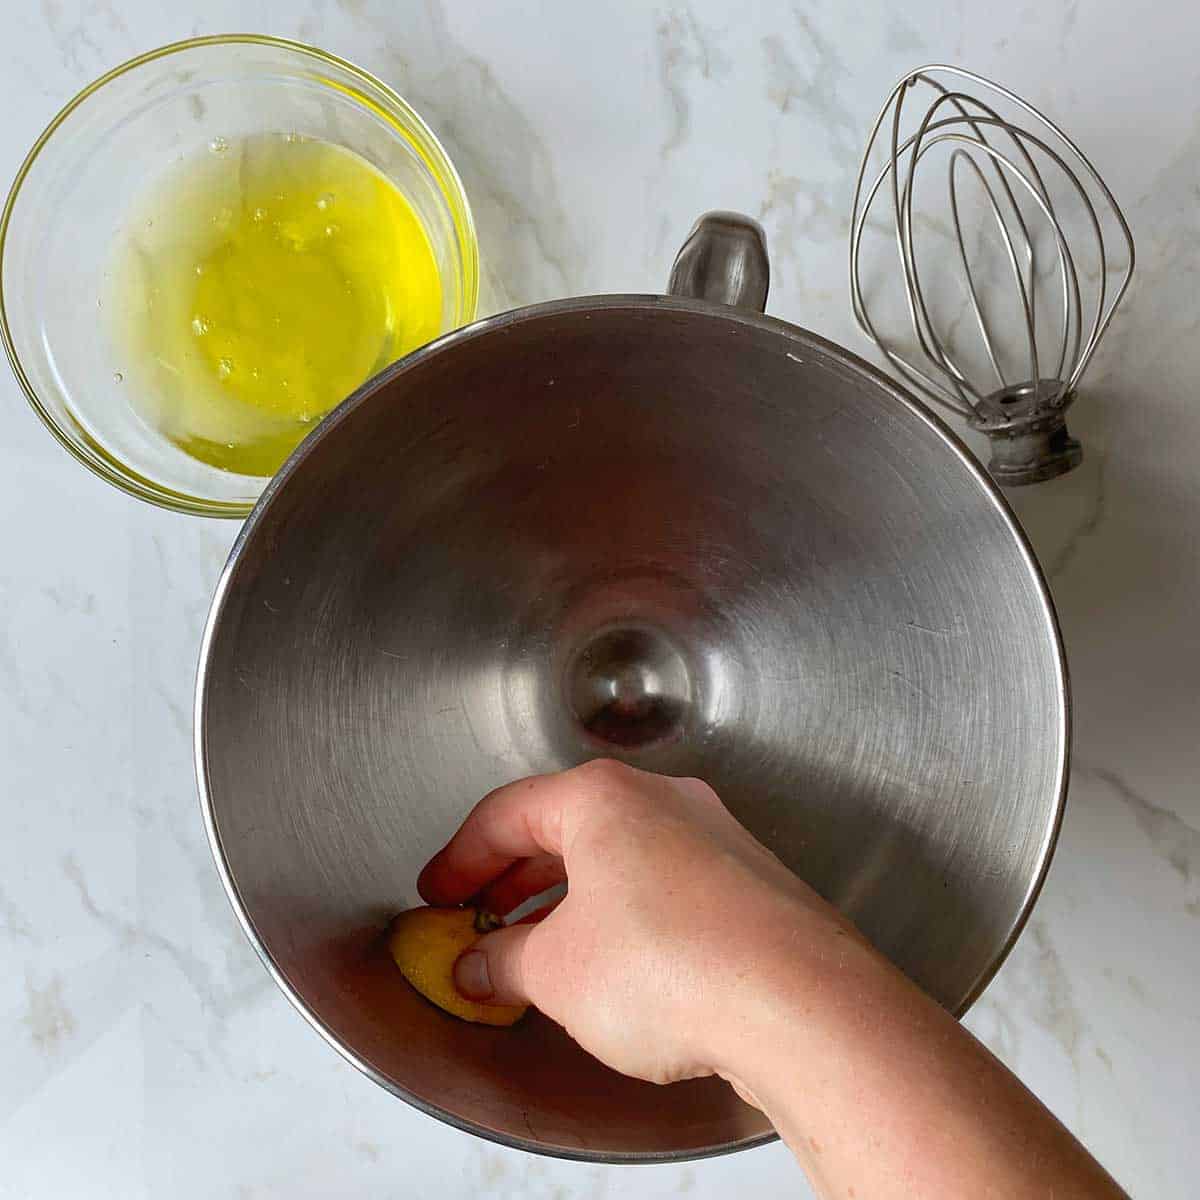 A hand cleaning a mixing bowl by rubbing half a lemon around it.